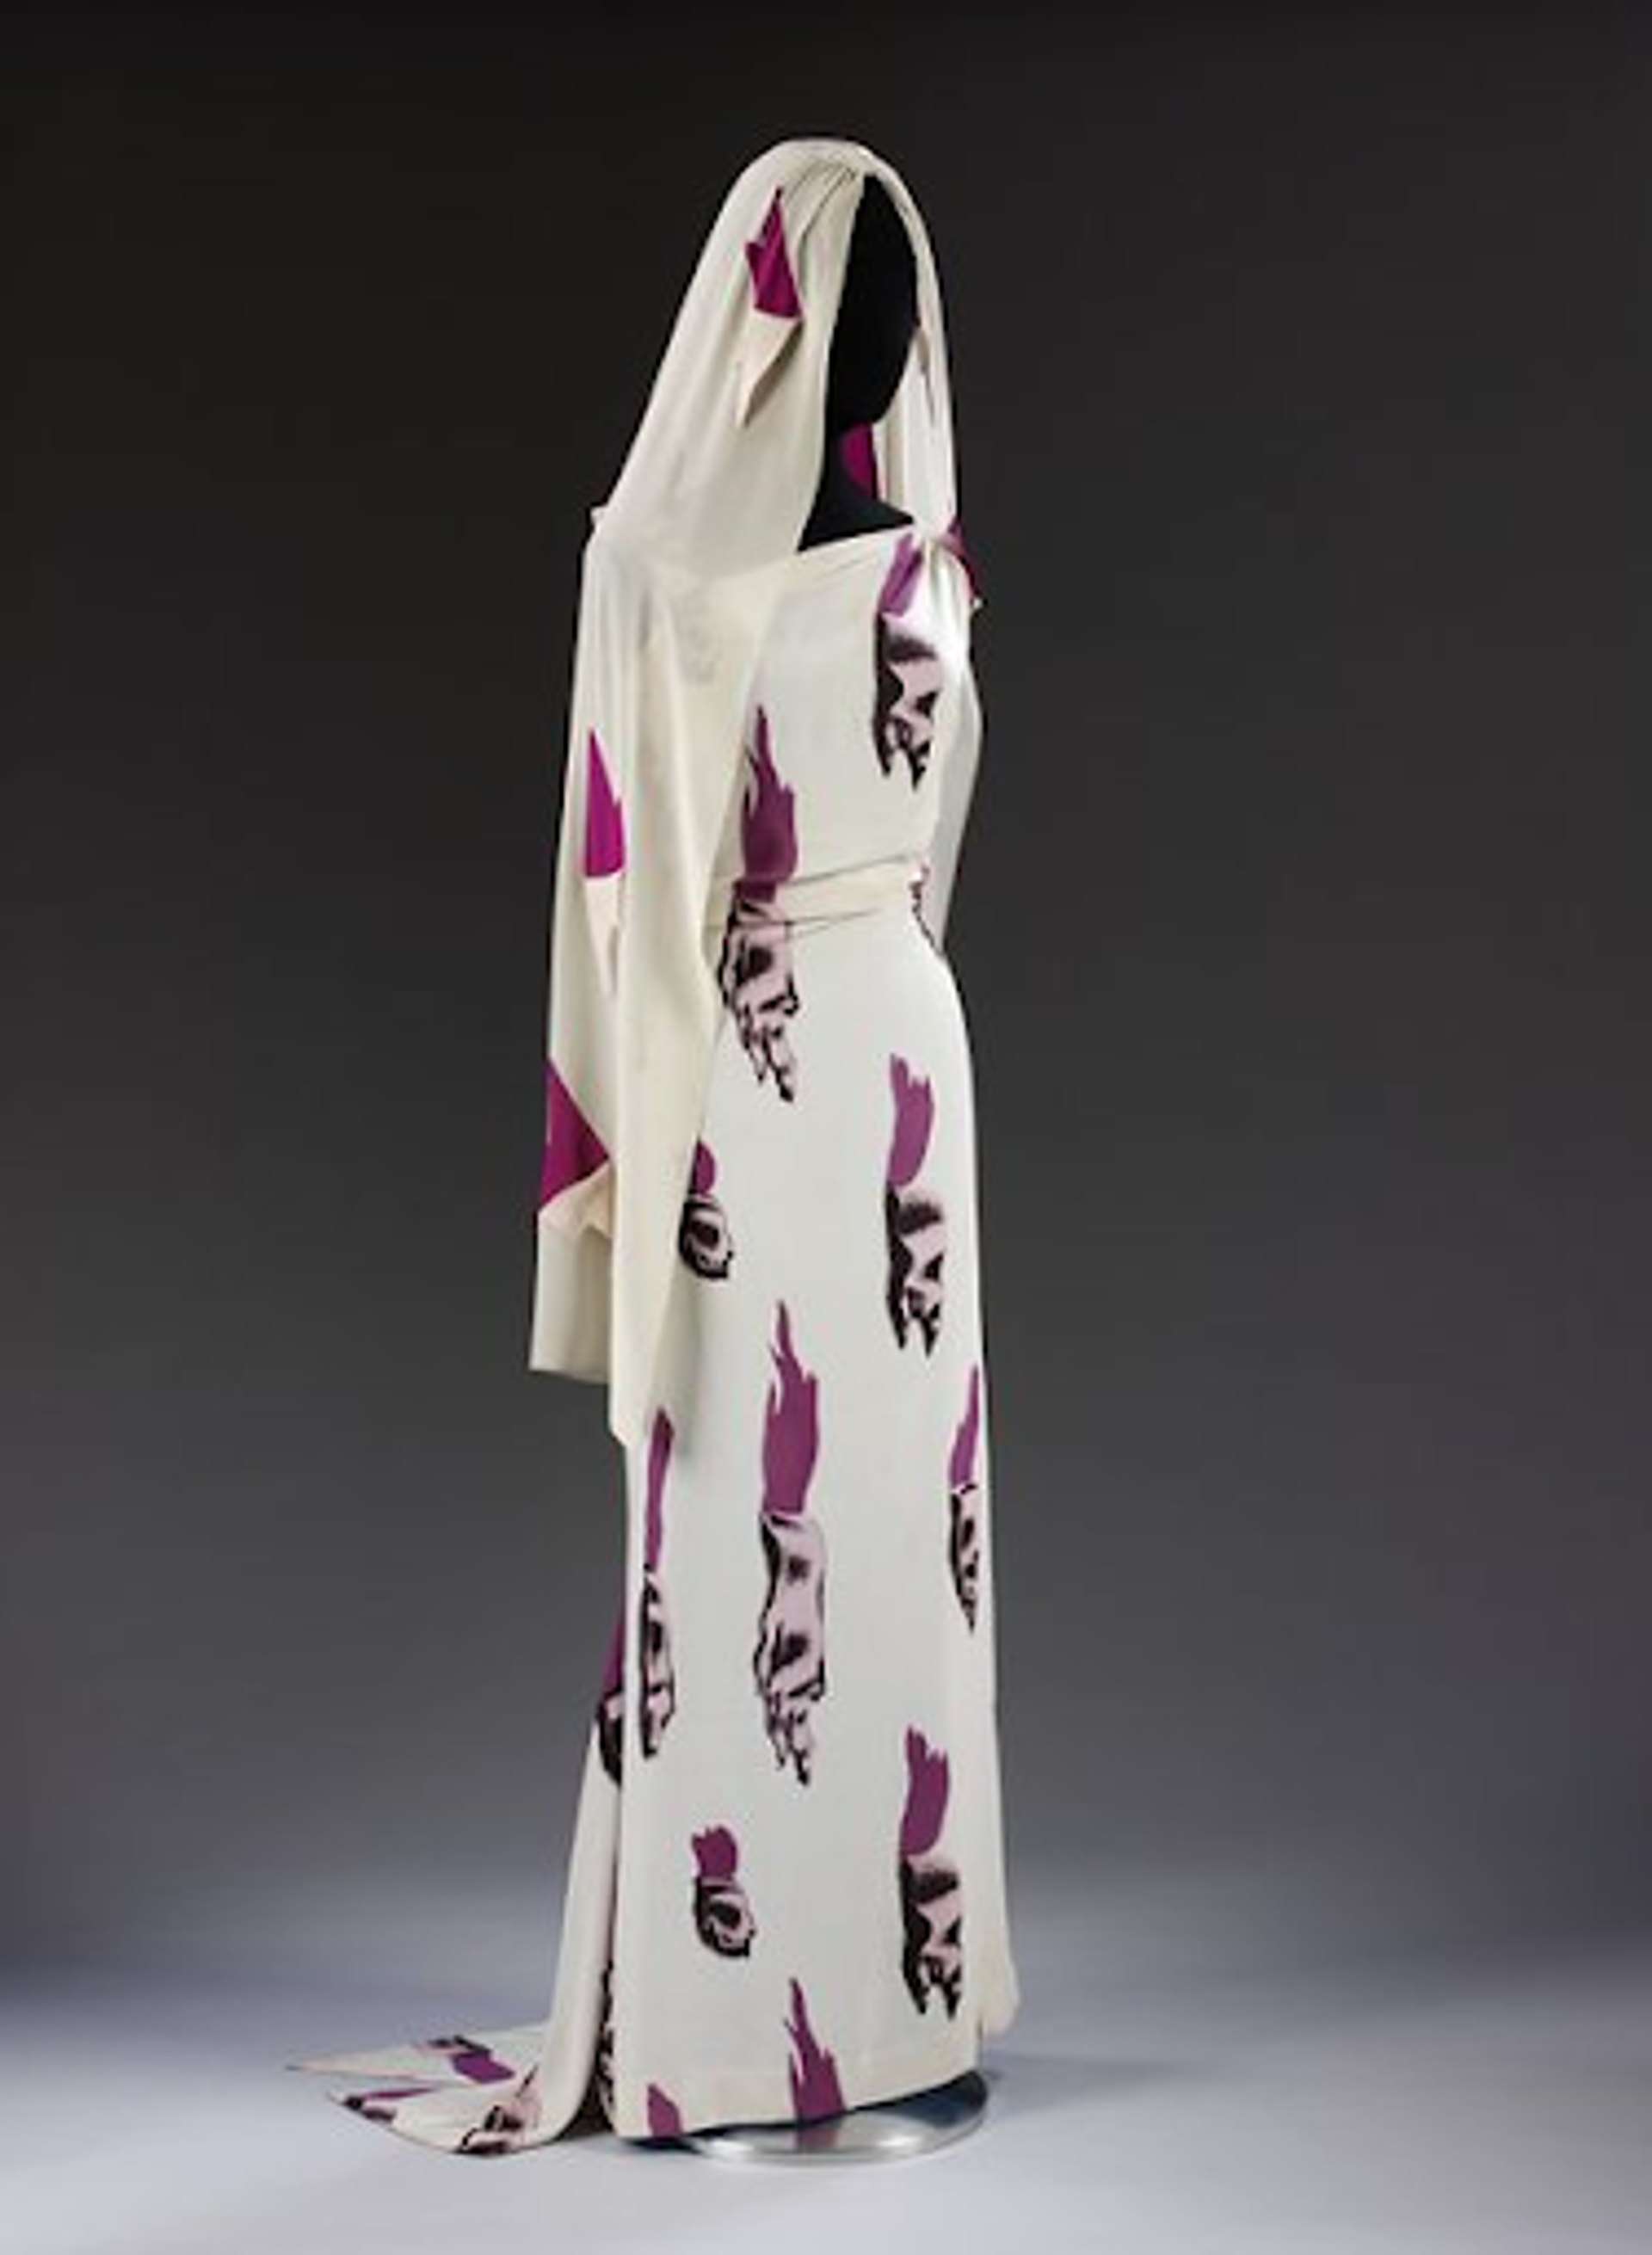 Photograph of long white gown and matching veil with purple prints.